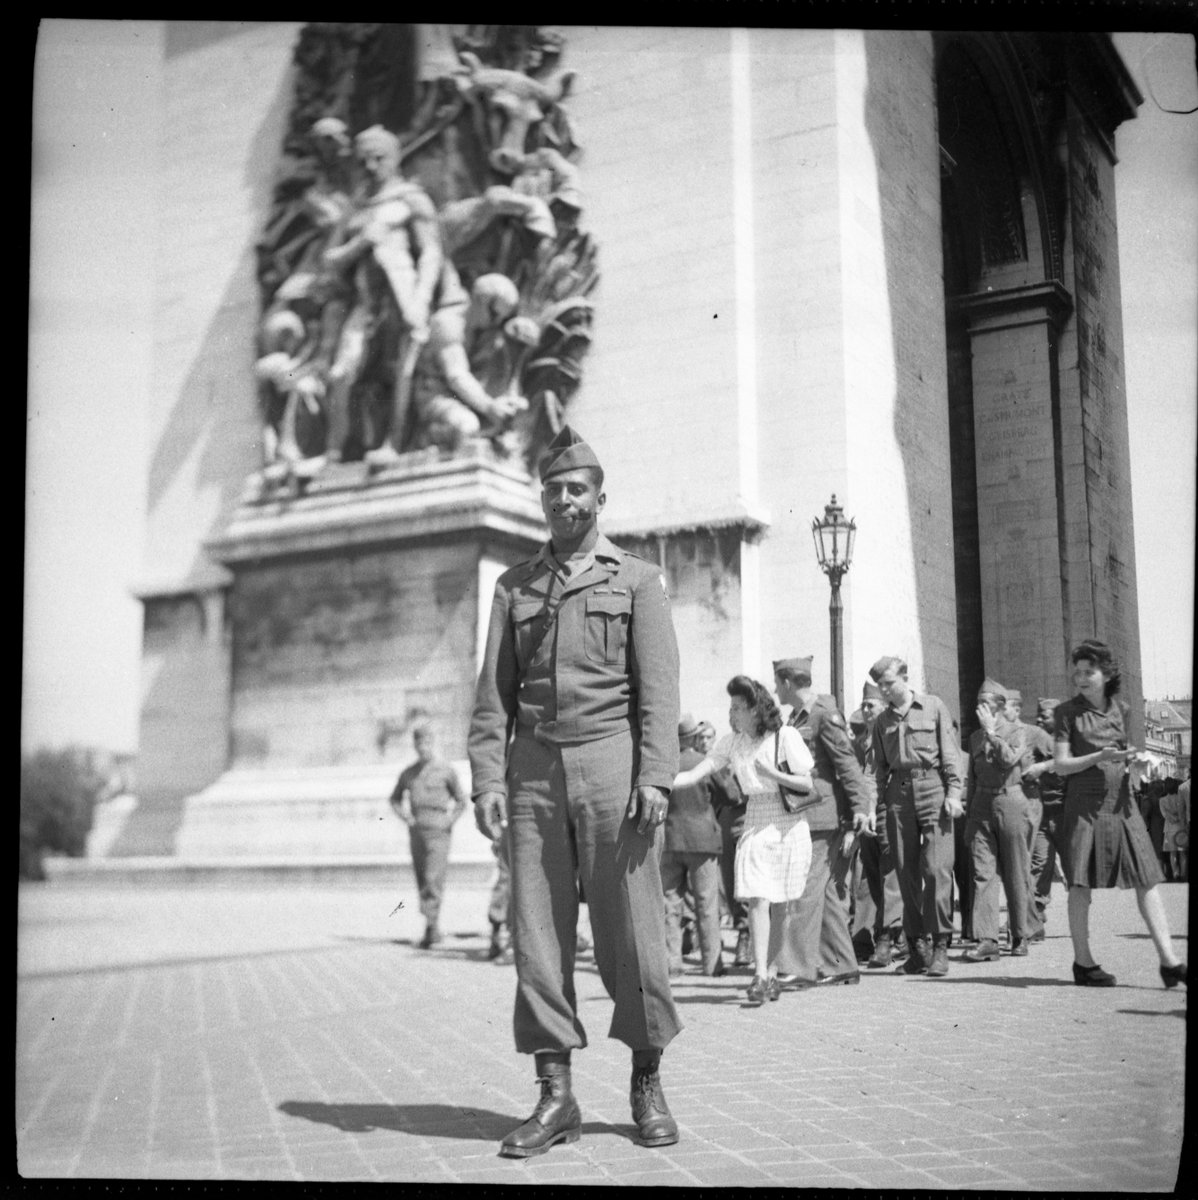 Photographer Singleton L. Harris (1922-2005) served with the 449th Signal Construction Battalion during WWII. While stationed in Italy in 1944, he took a photography by mail course and documented the people and places he saw. 1/2 #ArchivesSnapshot